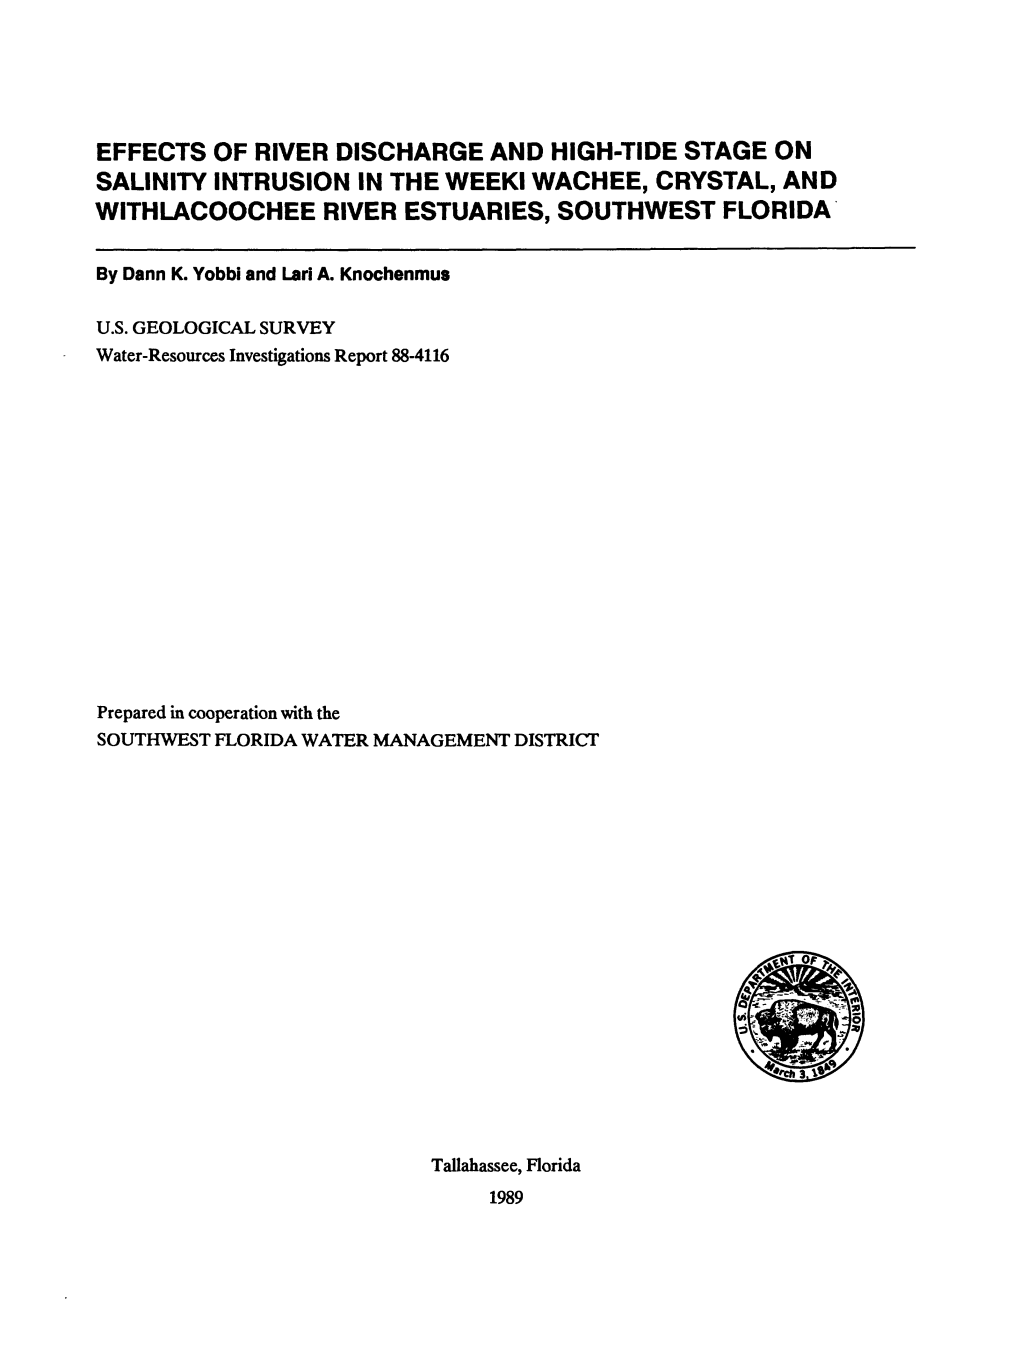 Effects of River Discharge and High-Tide Stage on Salinity Intrusion in the Weeki Wachee, Crystal, and Withlacoochee River Estuaries, Southwest Florida